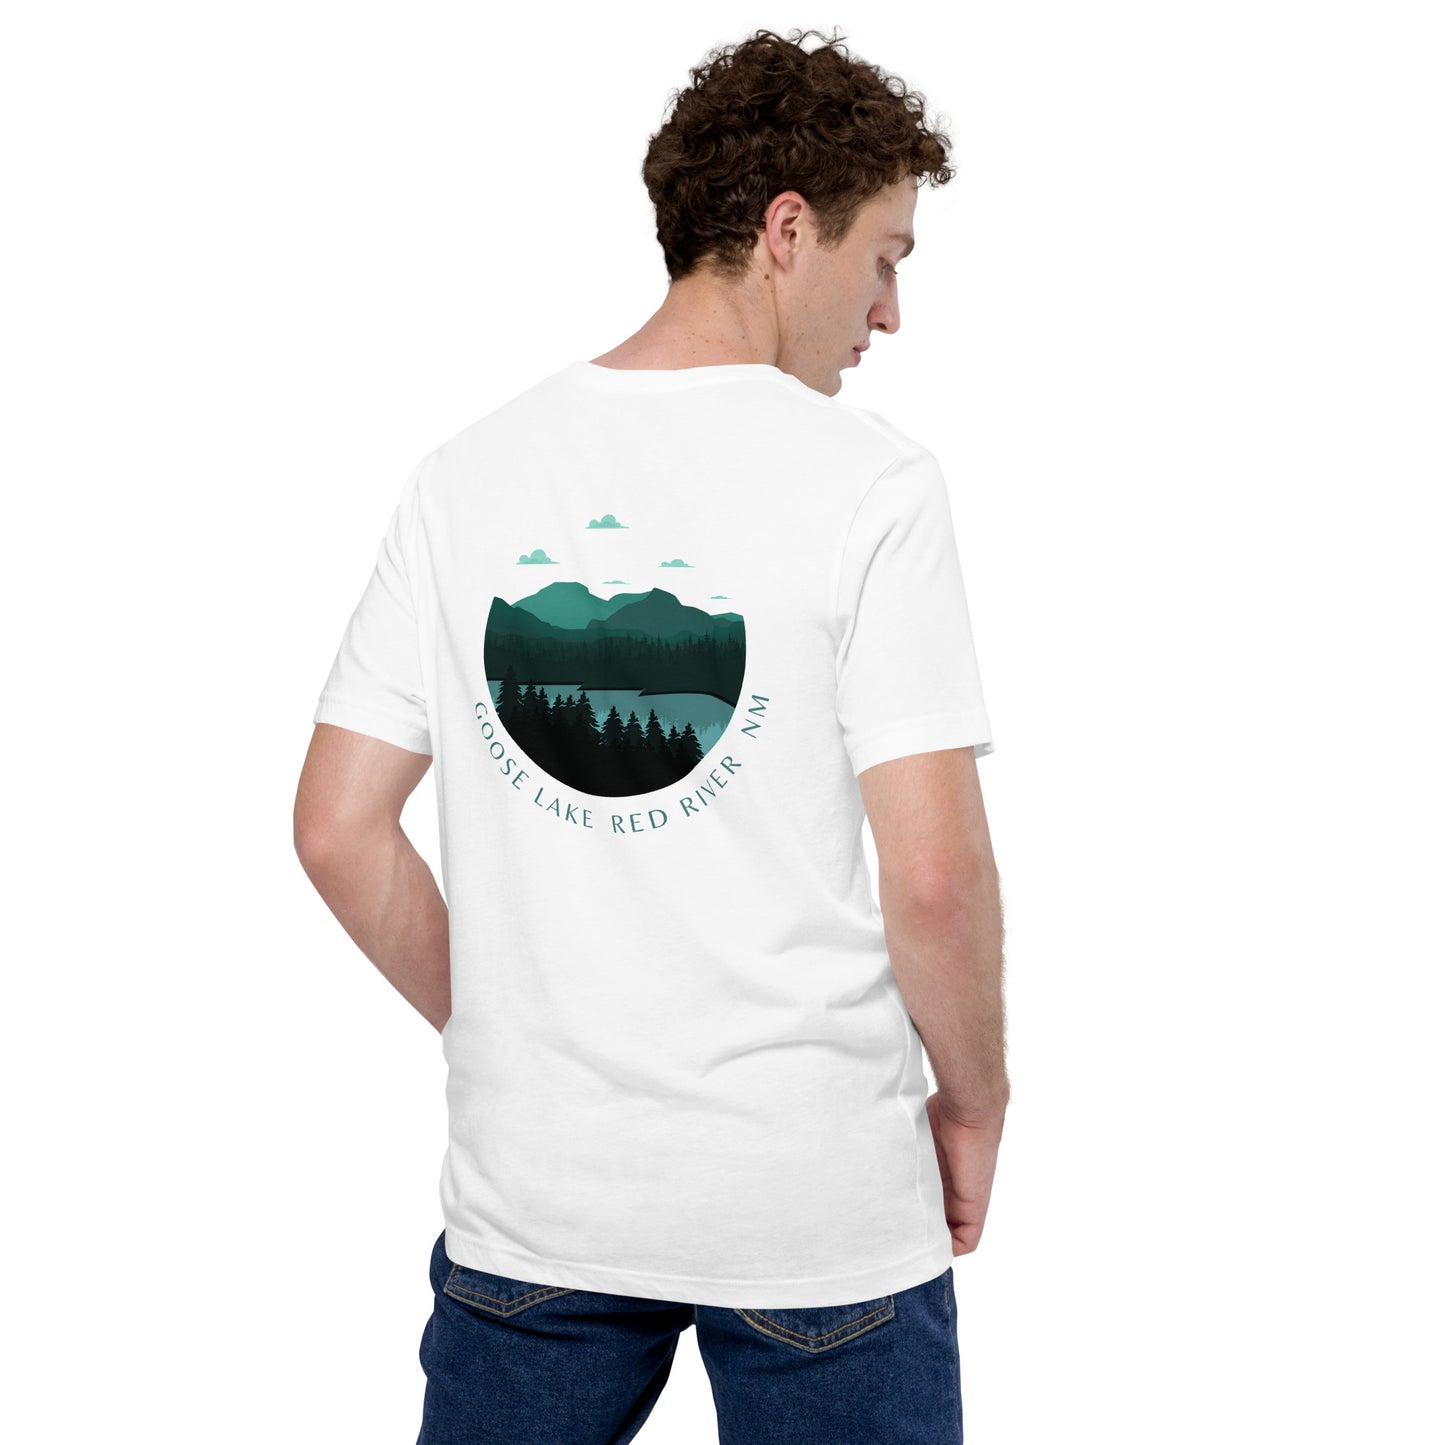 Goose Lake Red River New Mexico Unisex T-Shirt